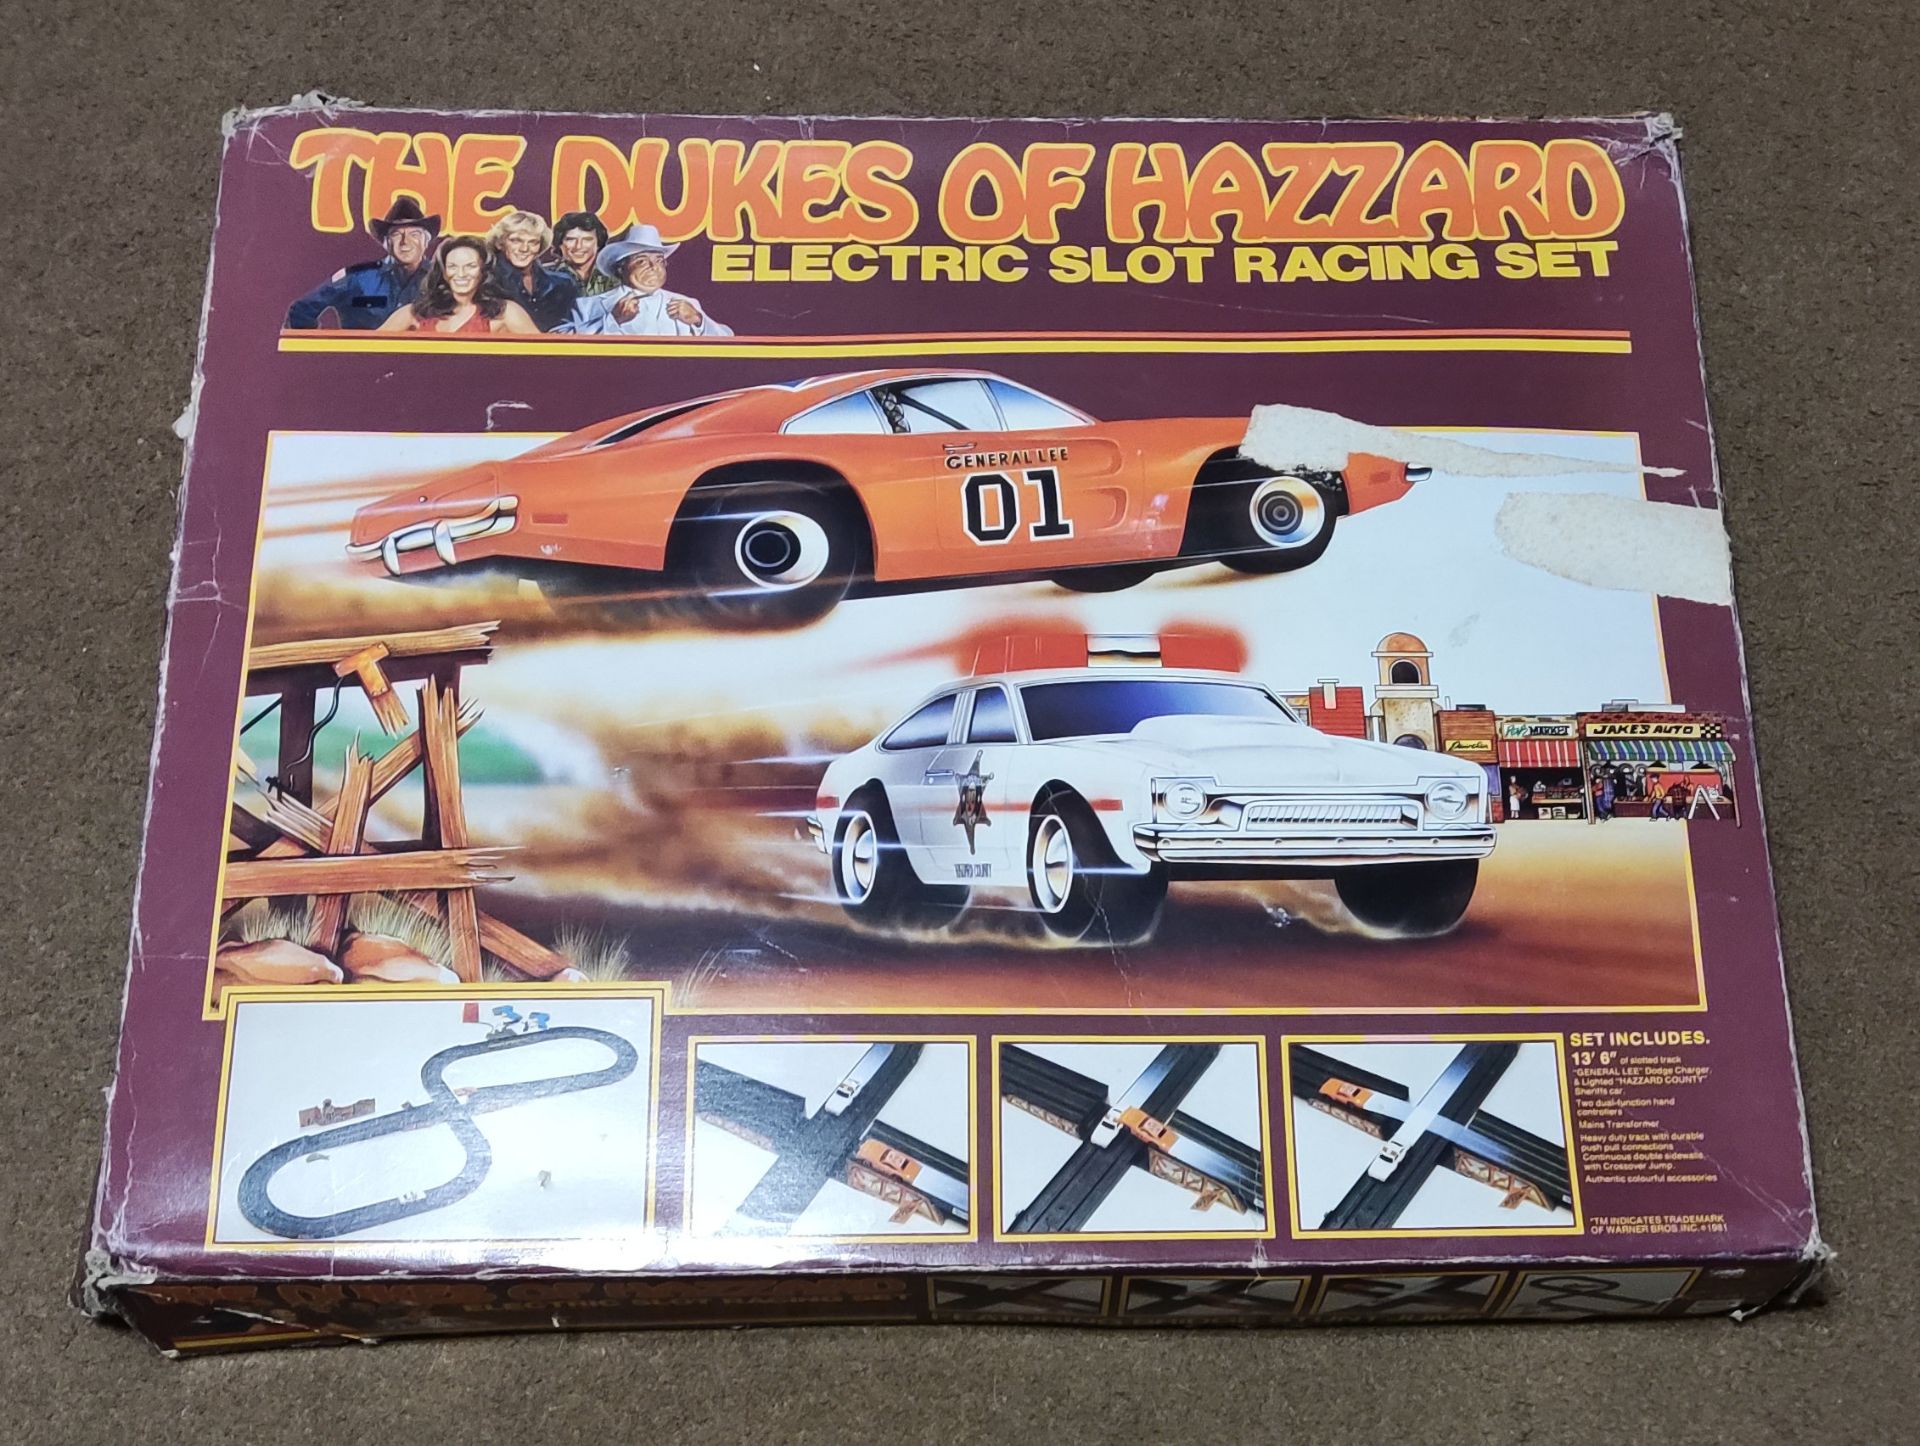 1 x Vintage Dukes of Hazzard Electric Slot Racing Set - Used - CL444 - NO VAT ON THE HAMMER -